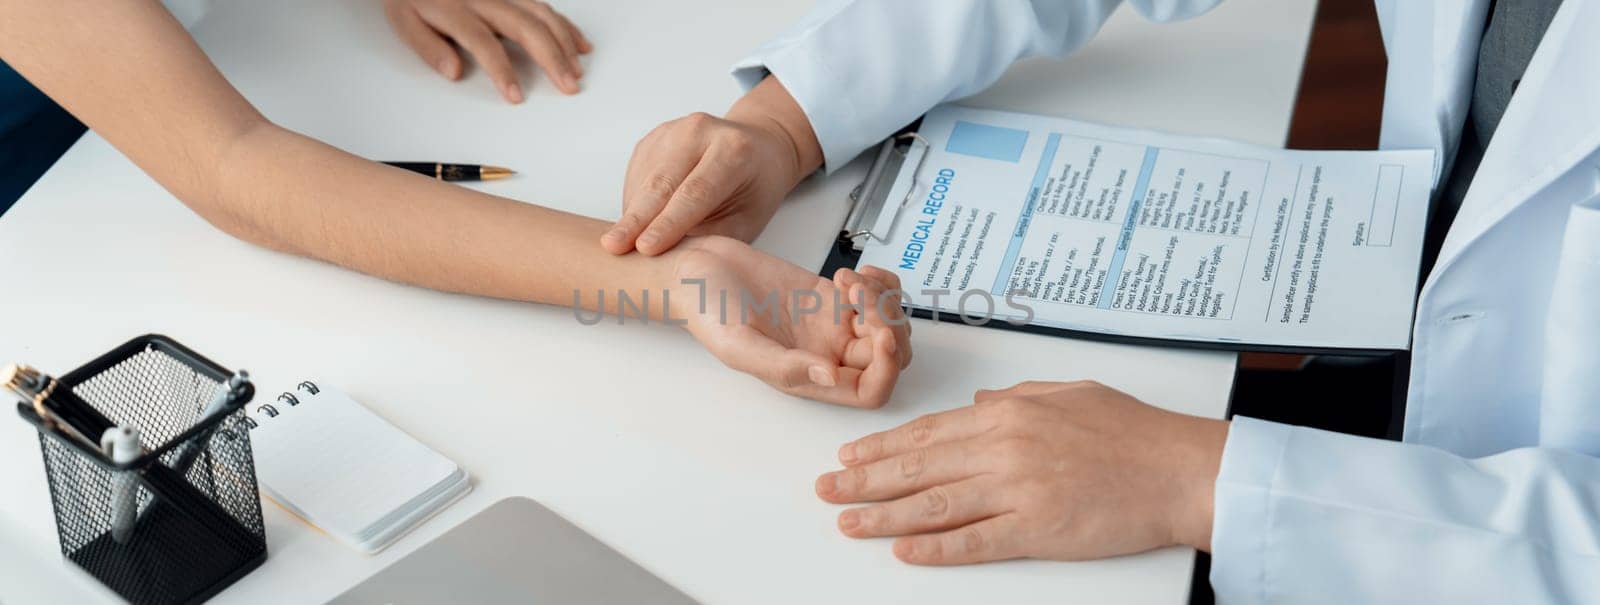 Patient attend doctor's appointment at clinic or hospital office. Doctor discusses medical treatment option, examining and diagnosis symptoms while checking the patient's pulse. Panorama Rigid